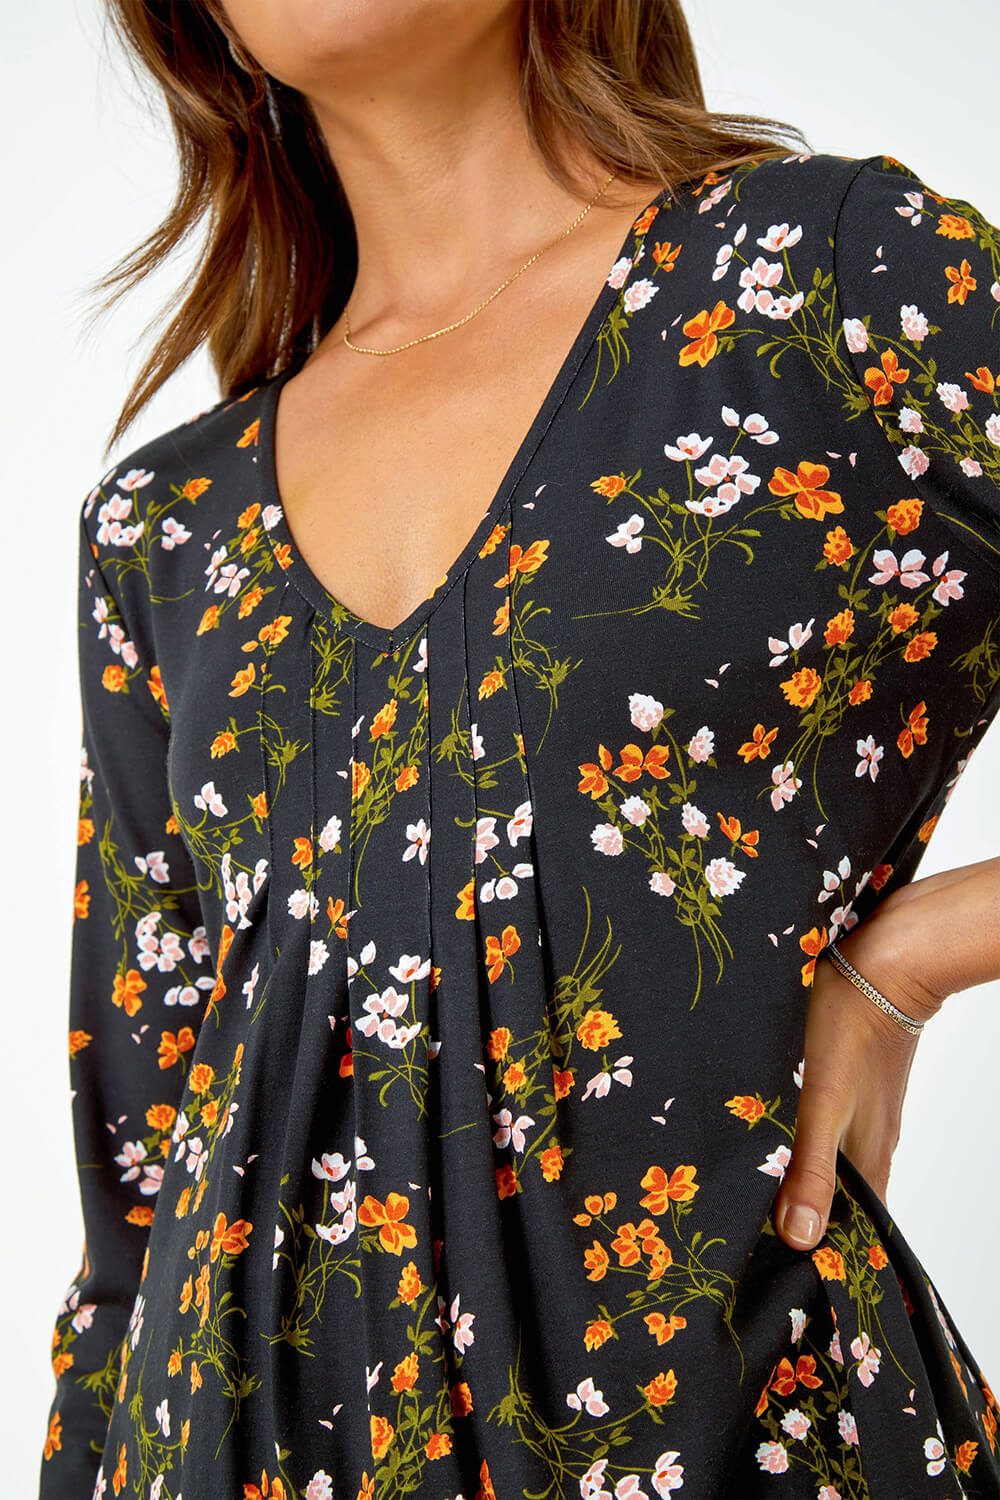 Black Floral Print Swing Stretch Top, Image 5 of 5